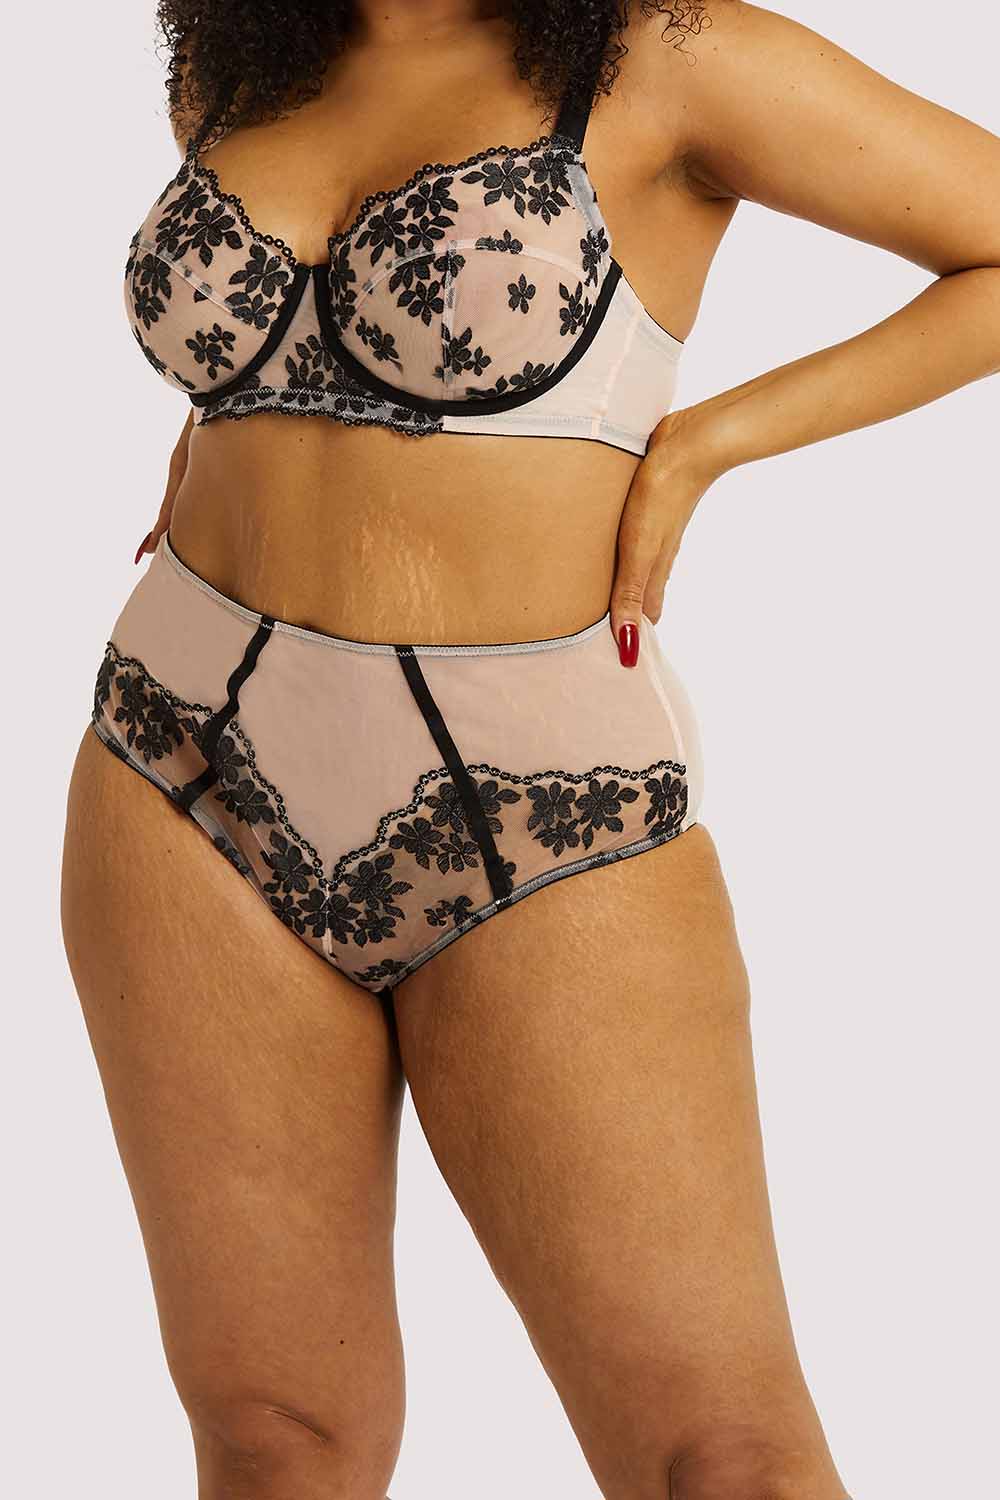 The delicate and sweet Evie Underwire Bra, Garter Belt, & Thong